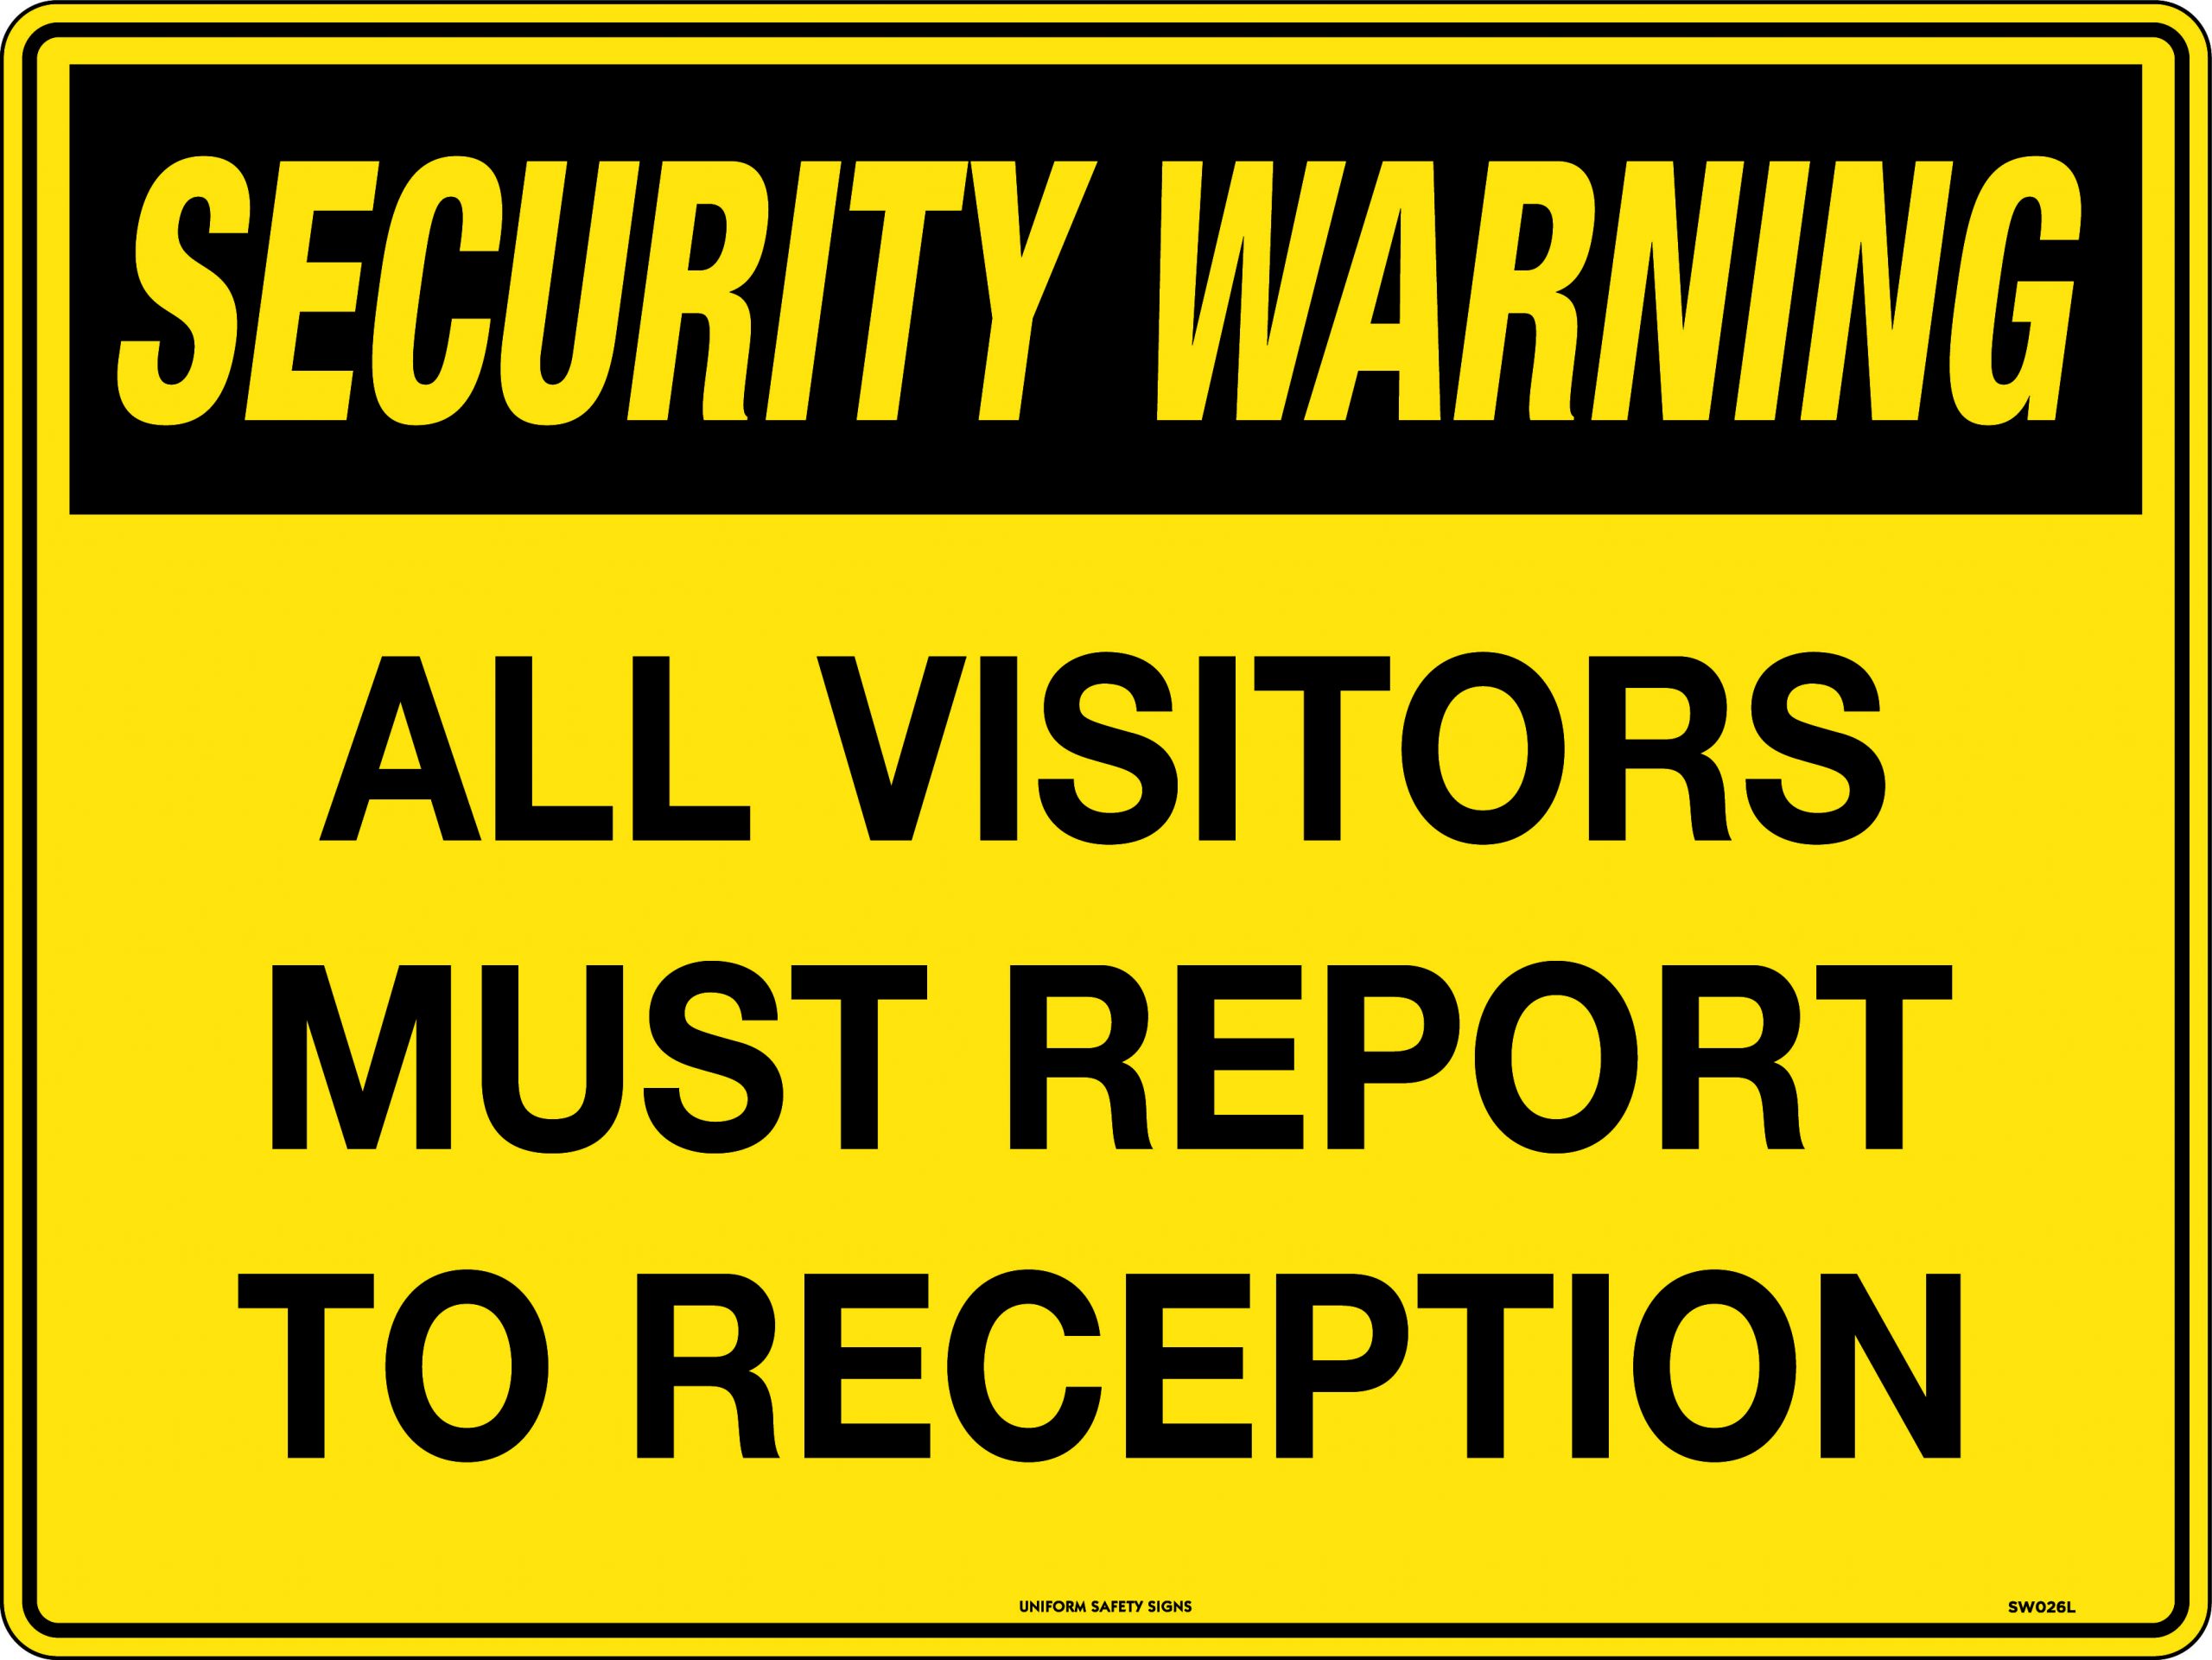 SIGN 600 X 450 METAL SECURITY WARNING ALL VISITORS MUST REPORT TO RECEPTION